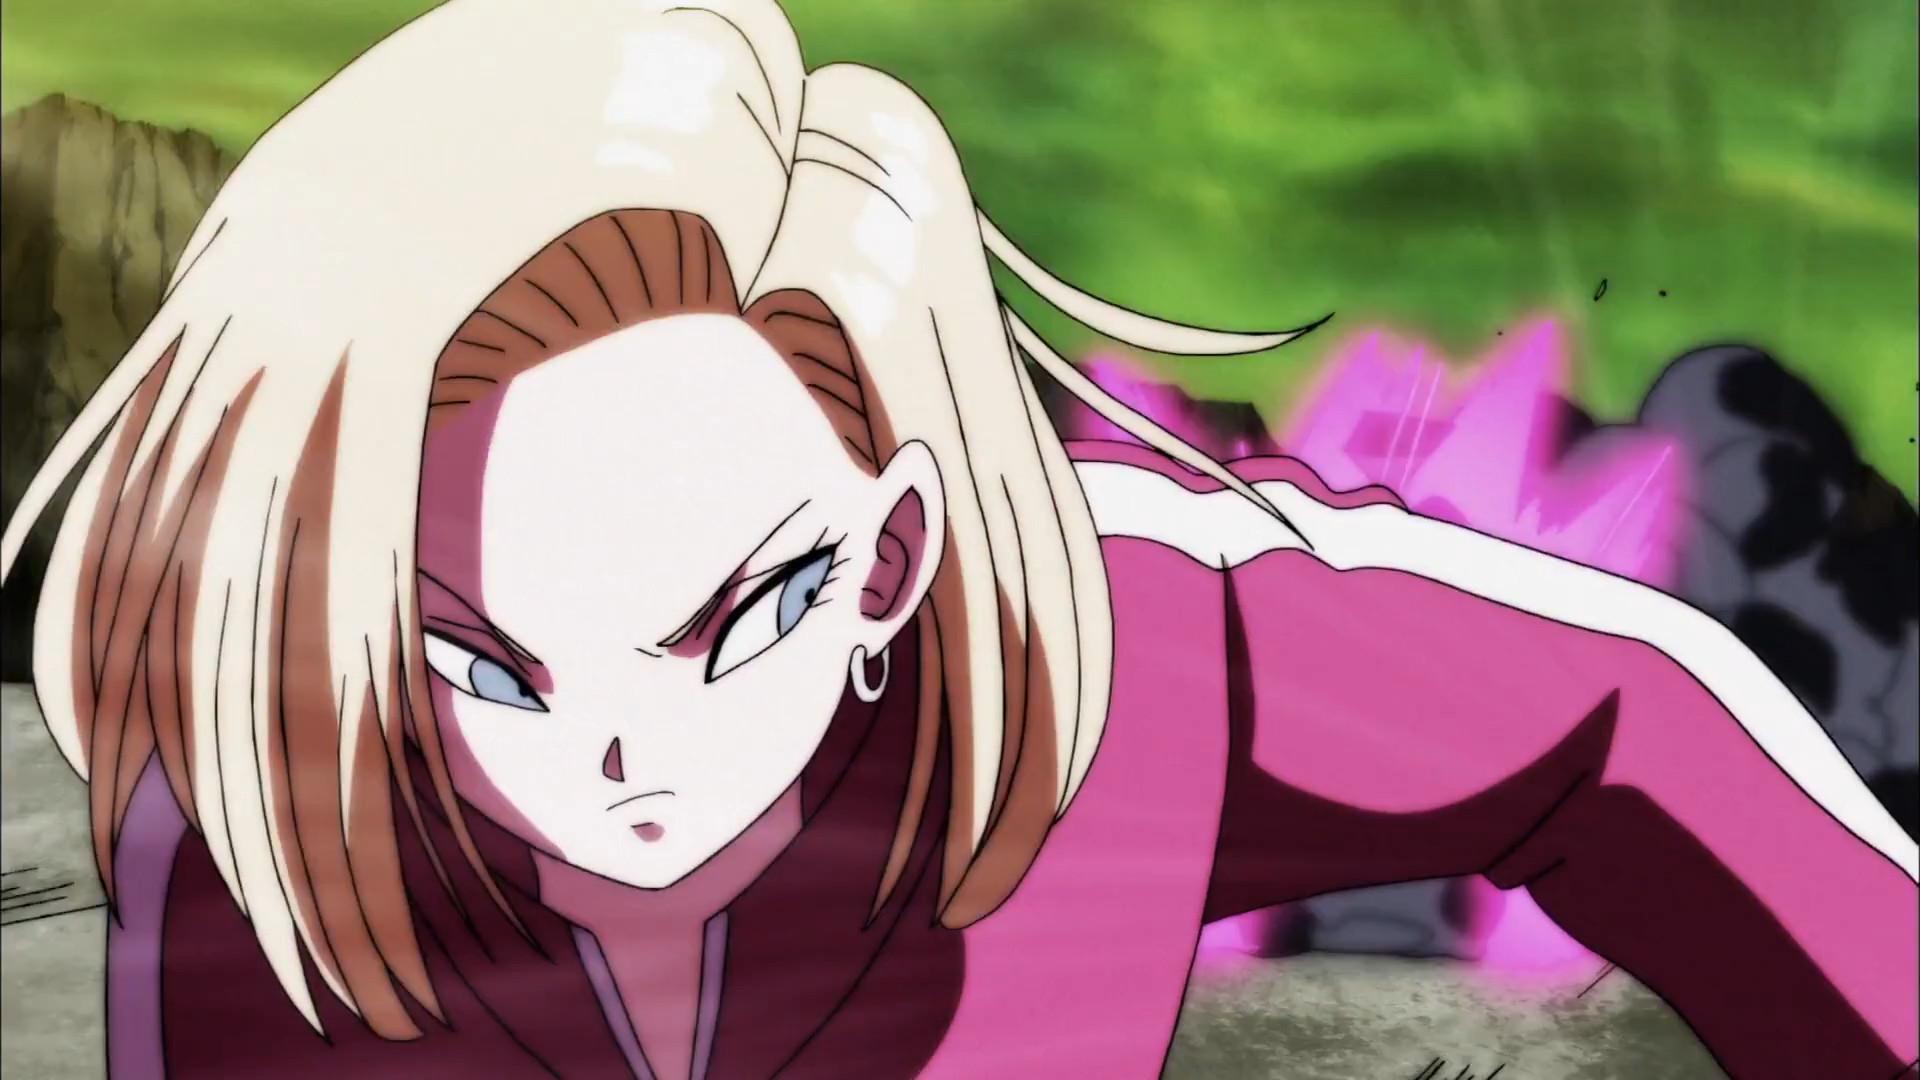 Android 18 Wallpaper